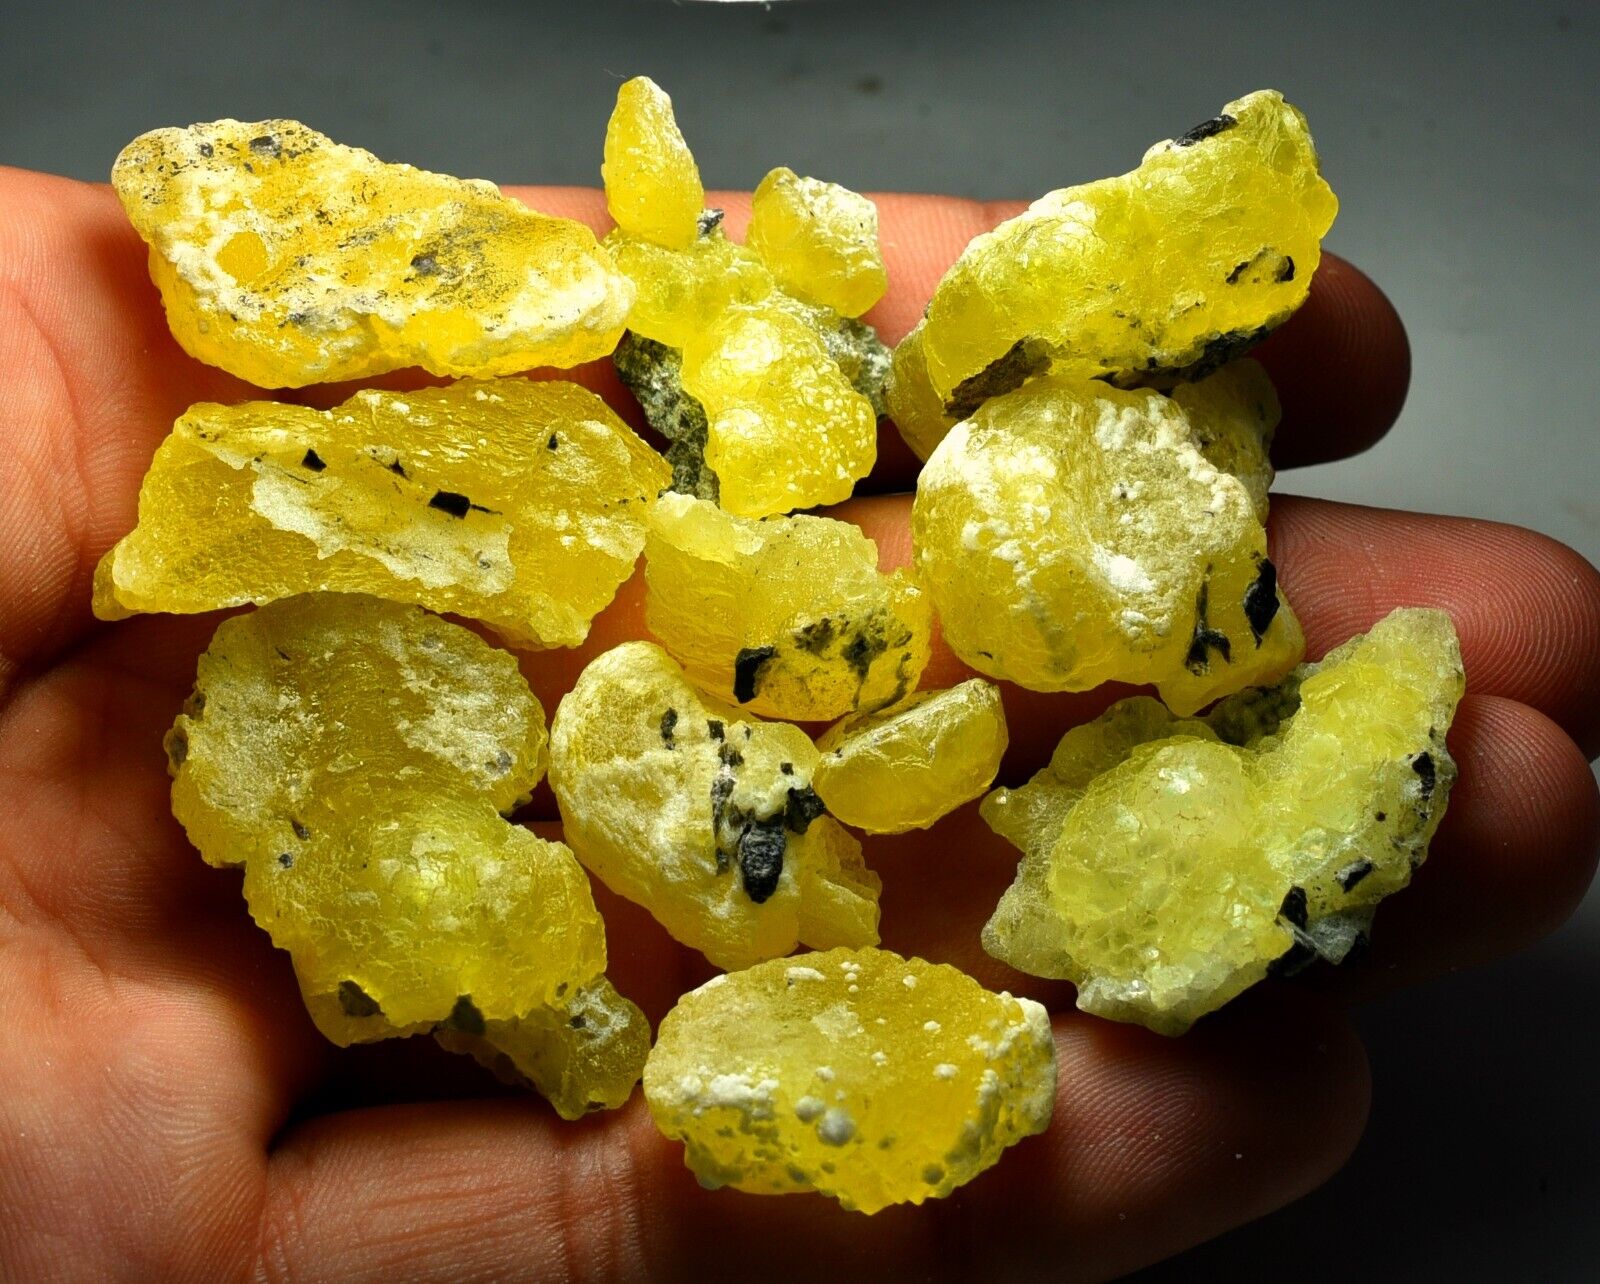 151 GM Glorious Natural Yellow Jelly Brucite Crystals Specimen From Pakistan